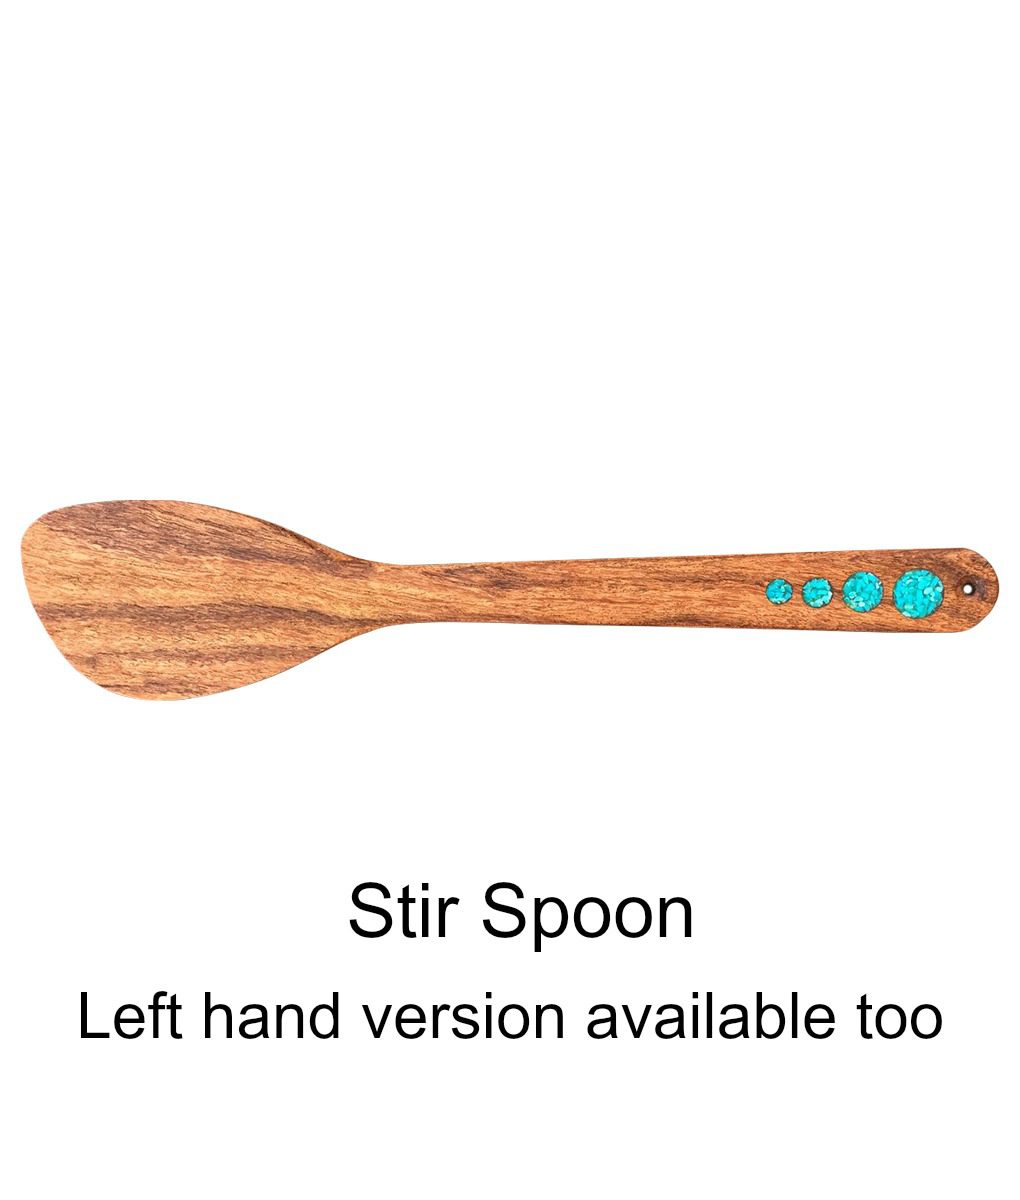 https://rusticartistry.com/wp-content/uploads/2018/11/wood-angled-stir-spoon-with-turquoise-inlay-for-left-or-right-hand.jpg